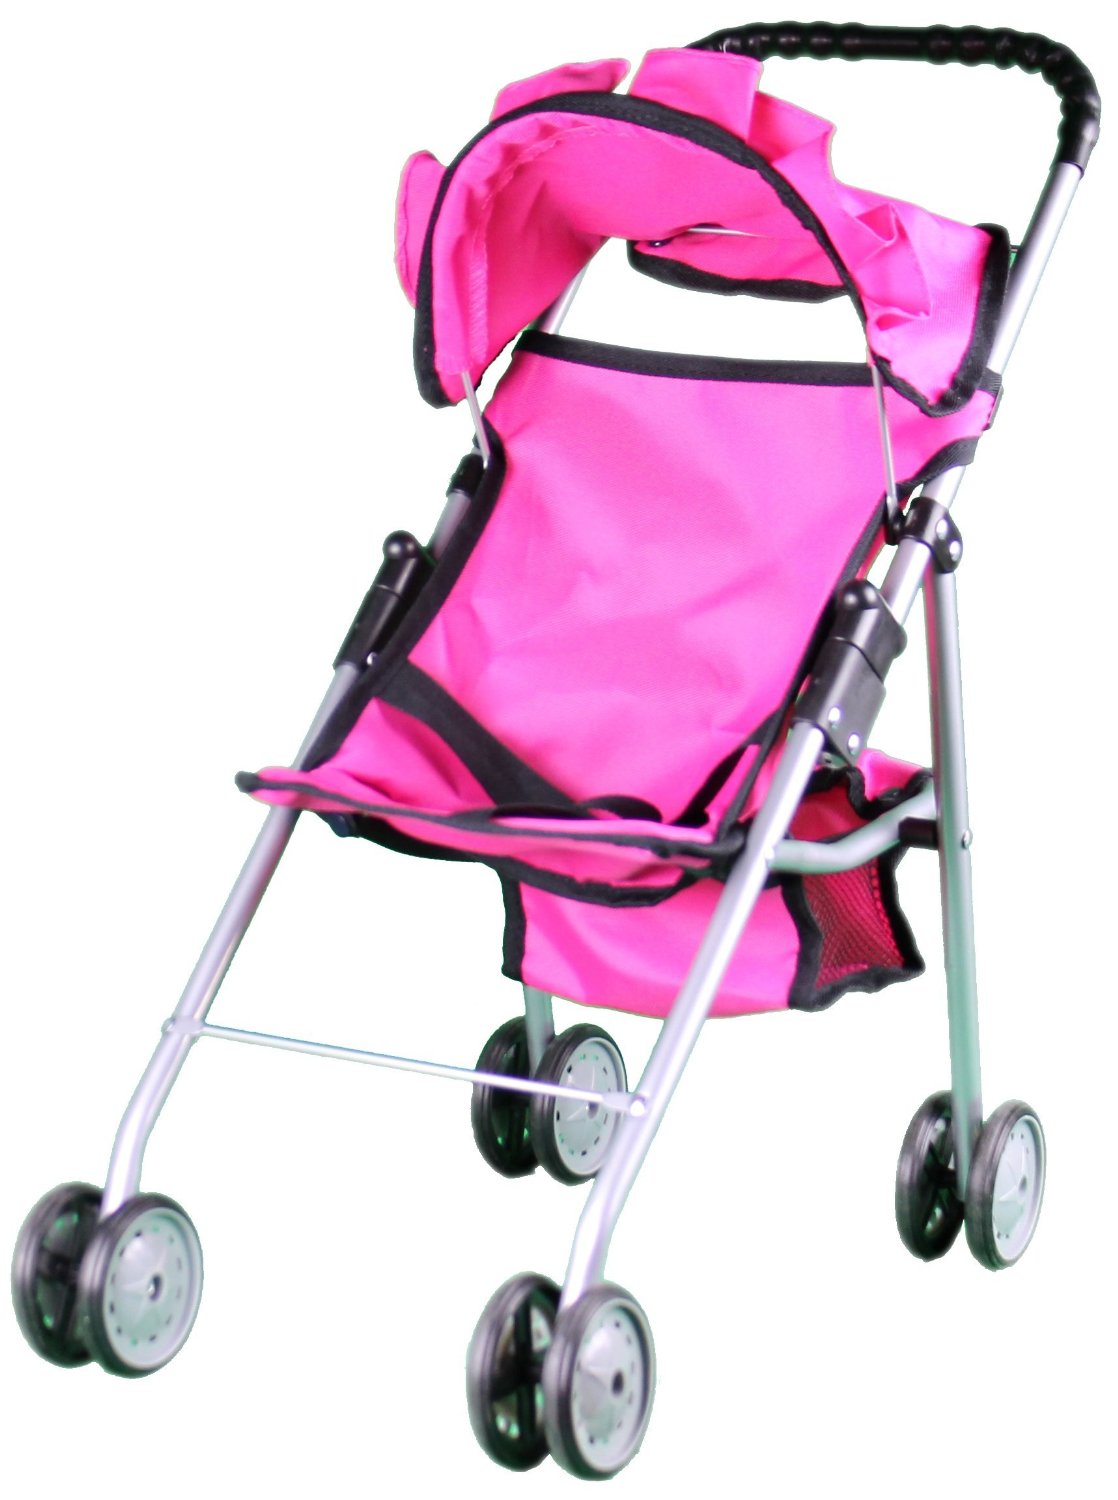 9-mommy-me-9318-my-first-doll-baby-stroller